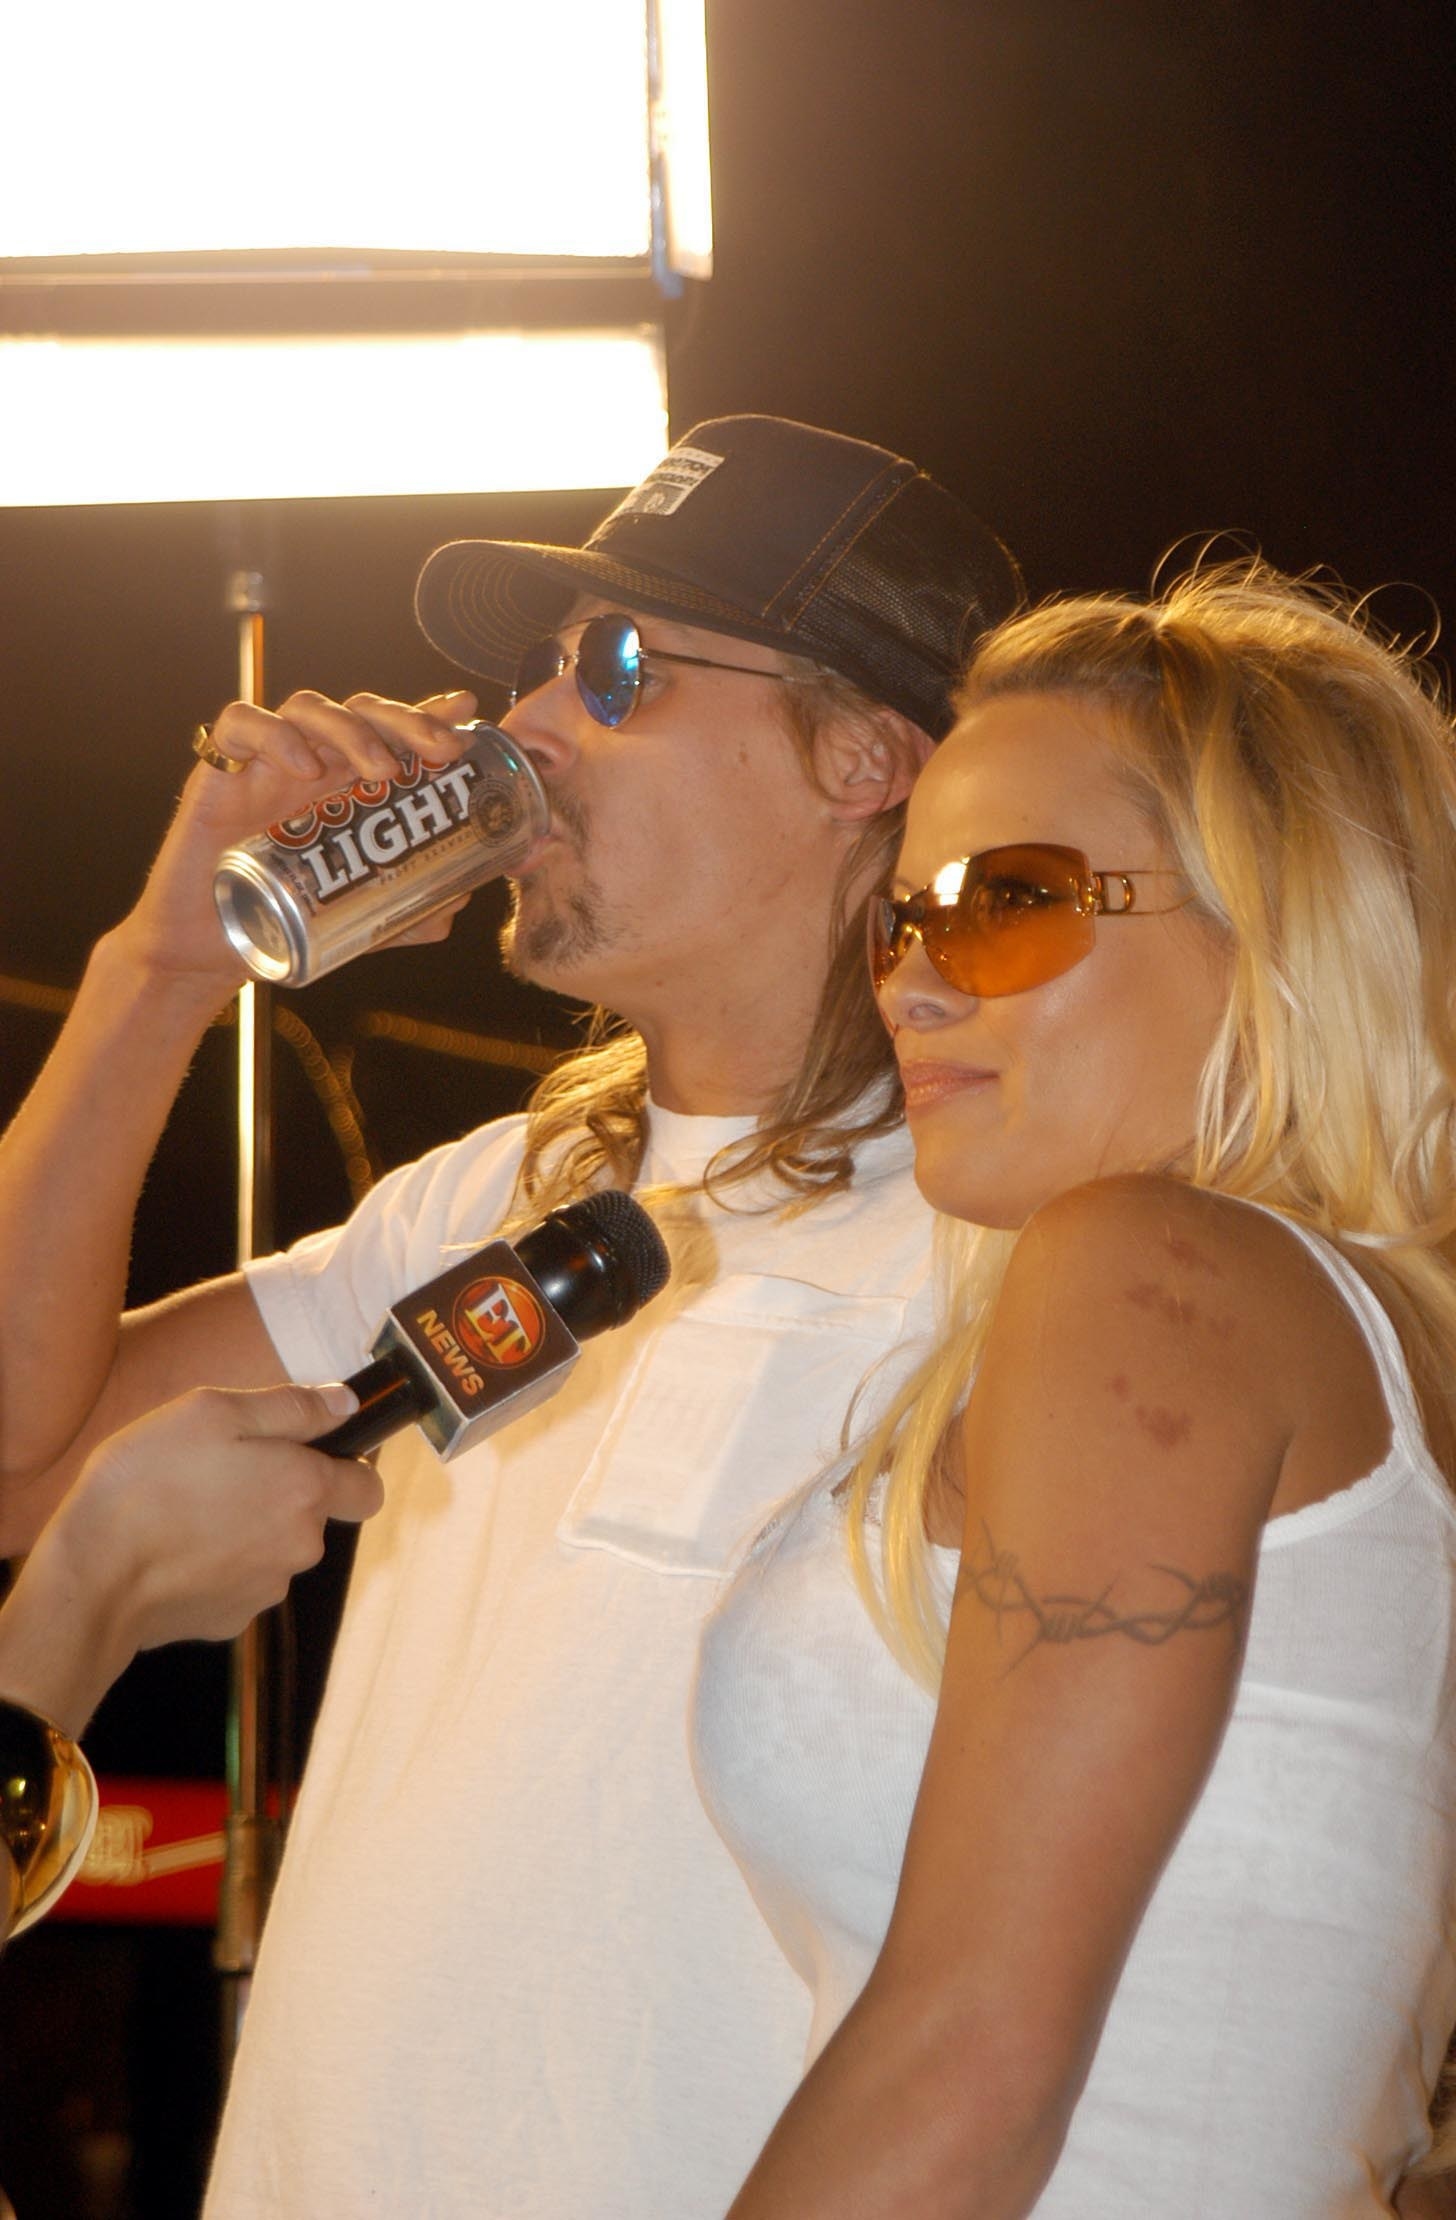 Bob drinking a can of Coors Light beer as he and Pam are being interviewed by ET News on the red carpet